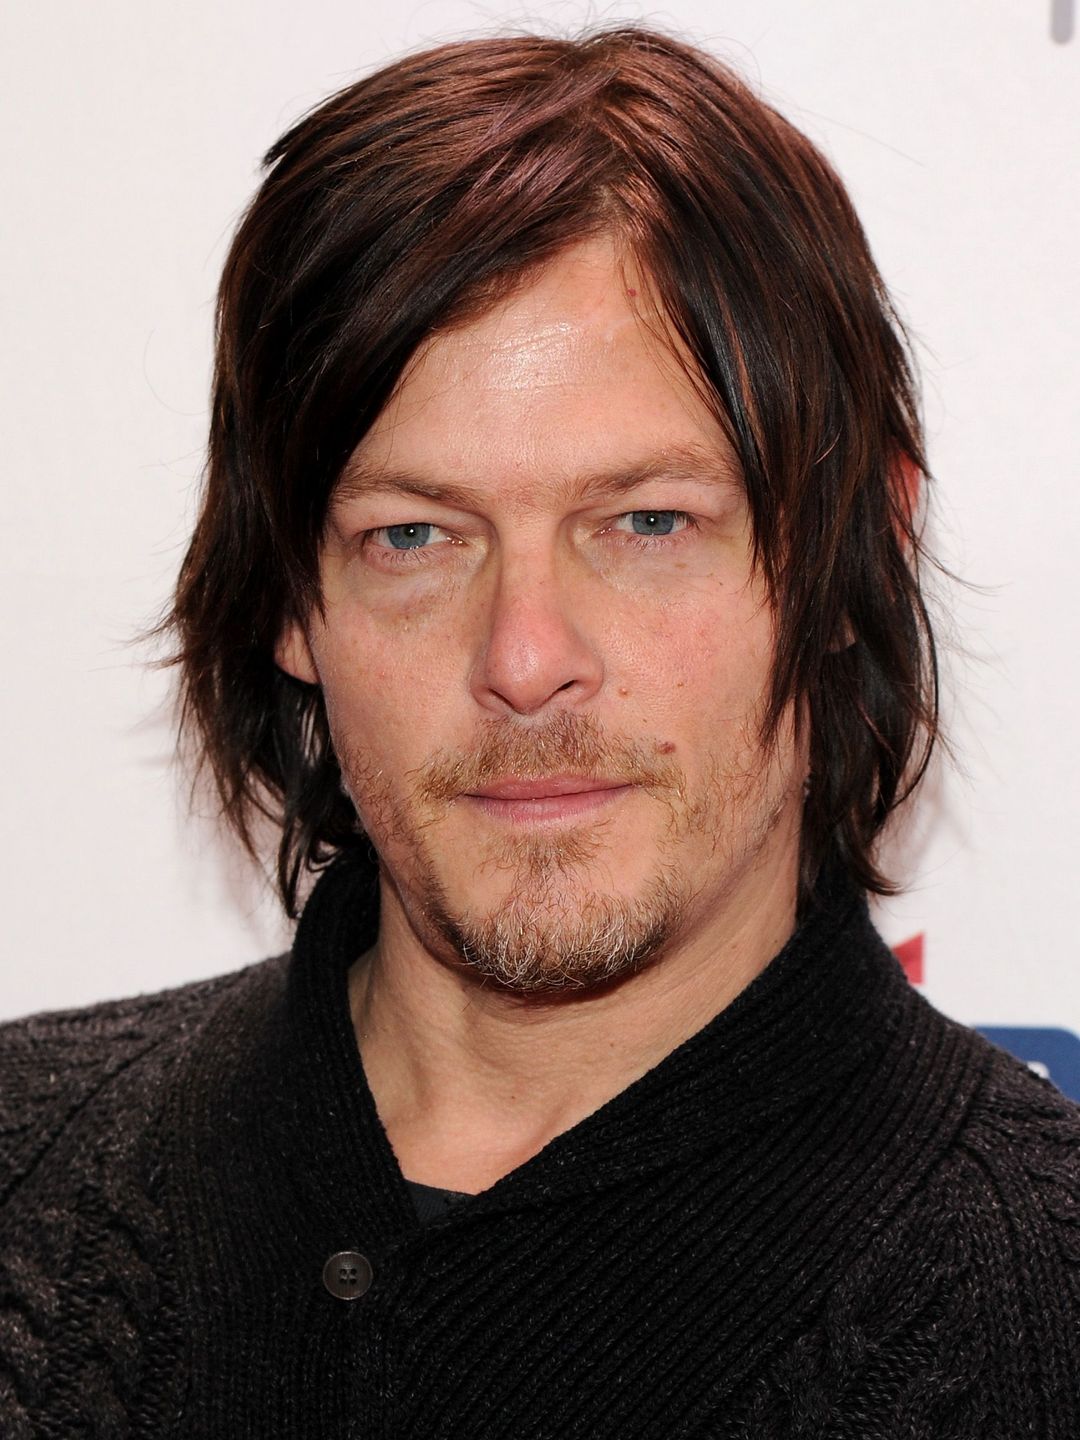 Norman Reedus who are his parents